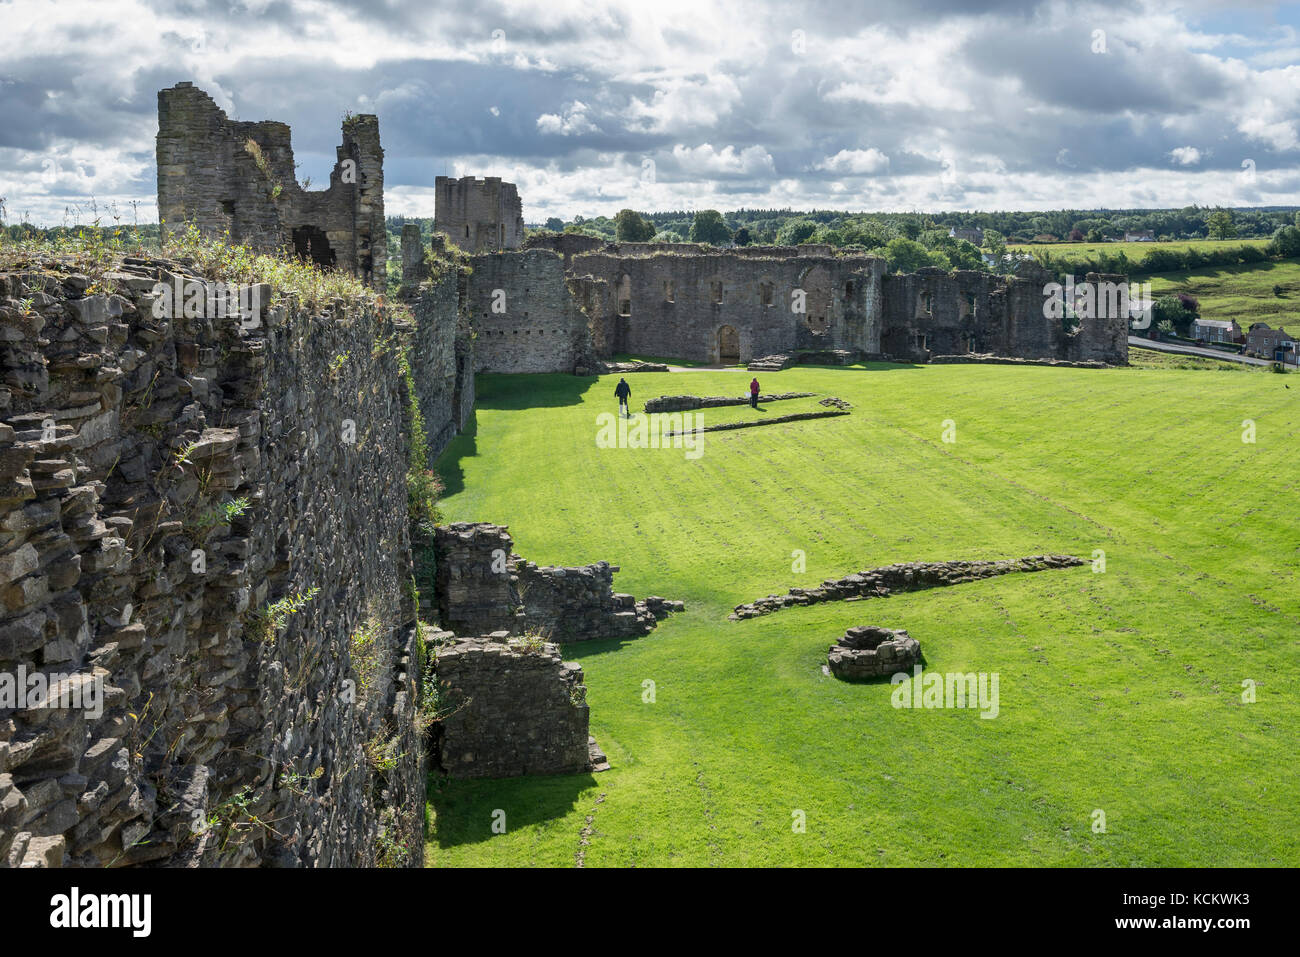 View from the castle keep at Richmond Castle, North Yorkshire, England. Stock Photo